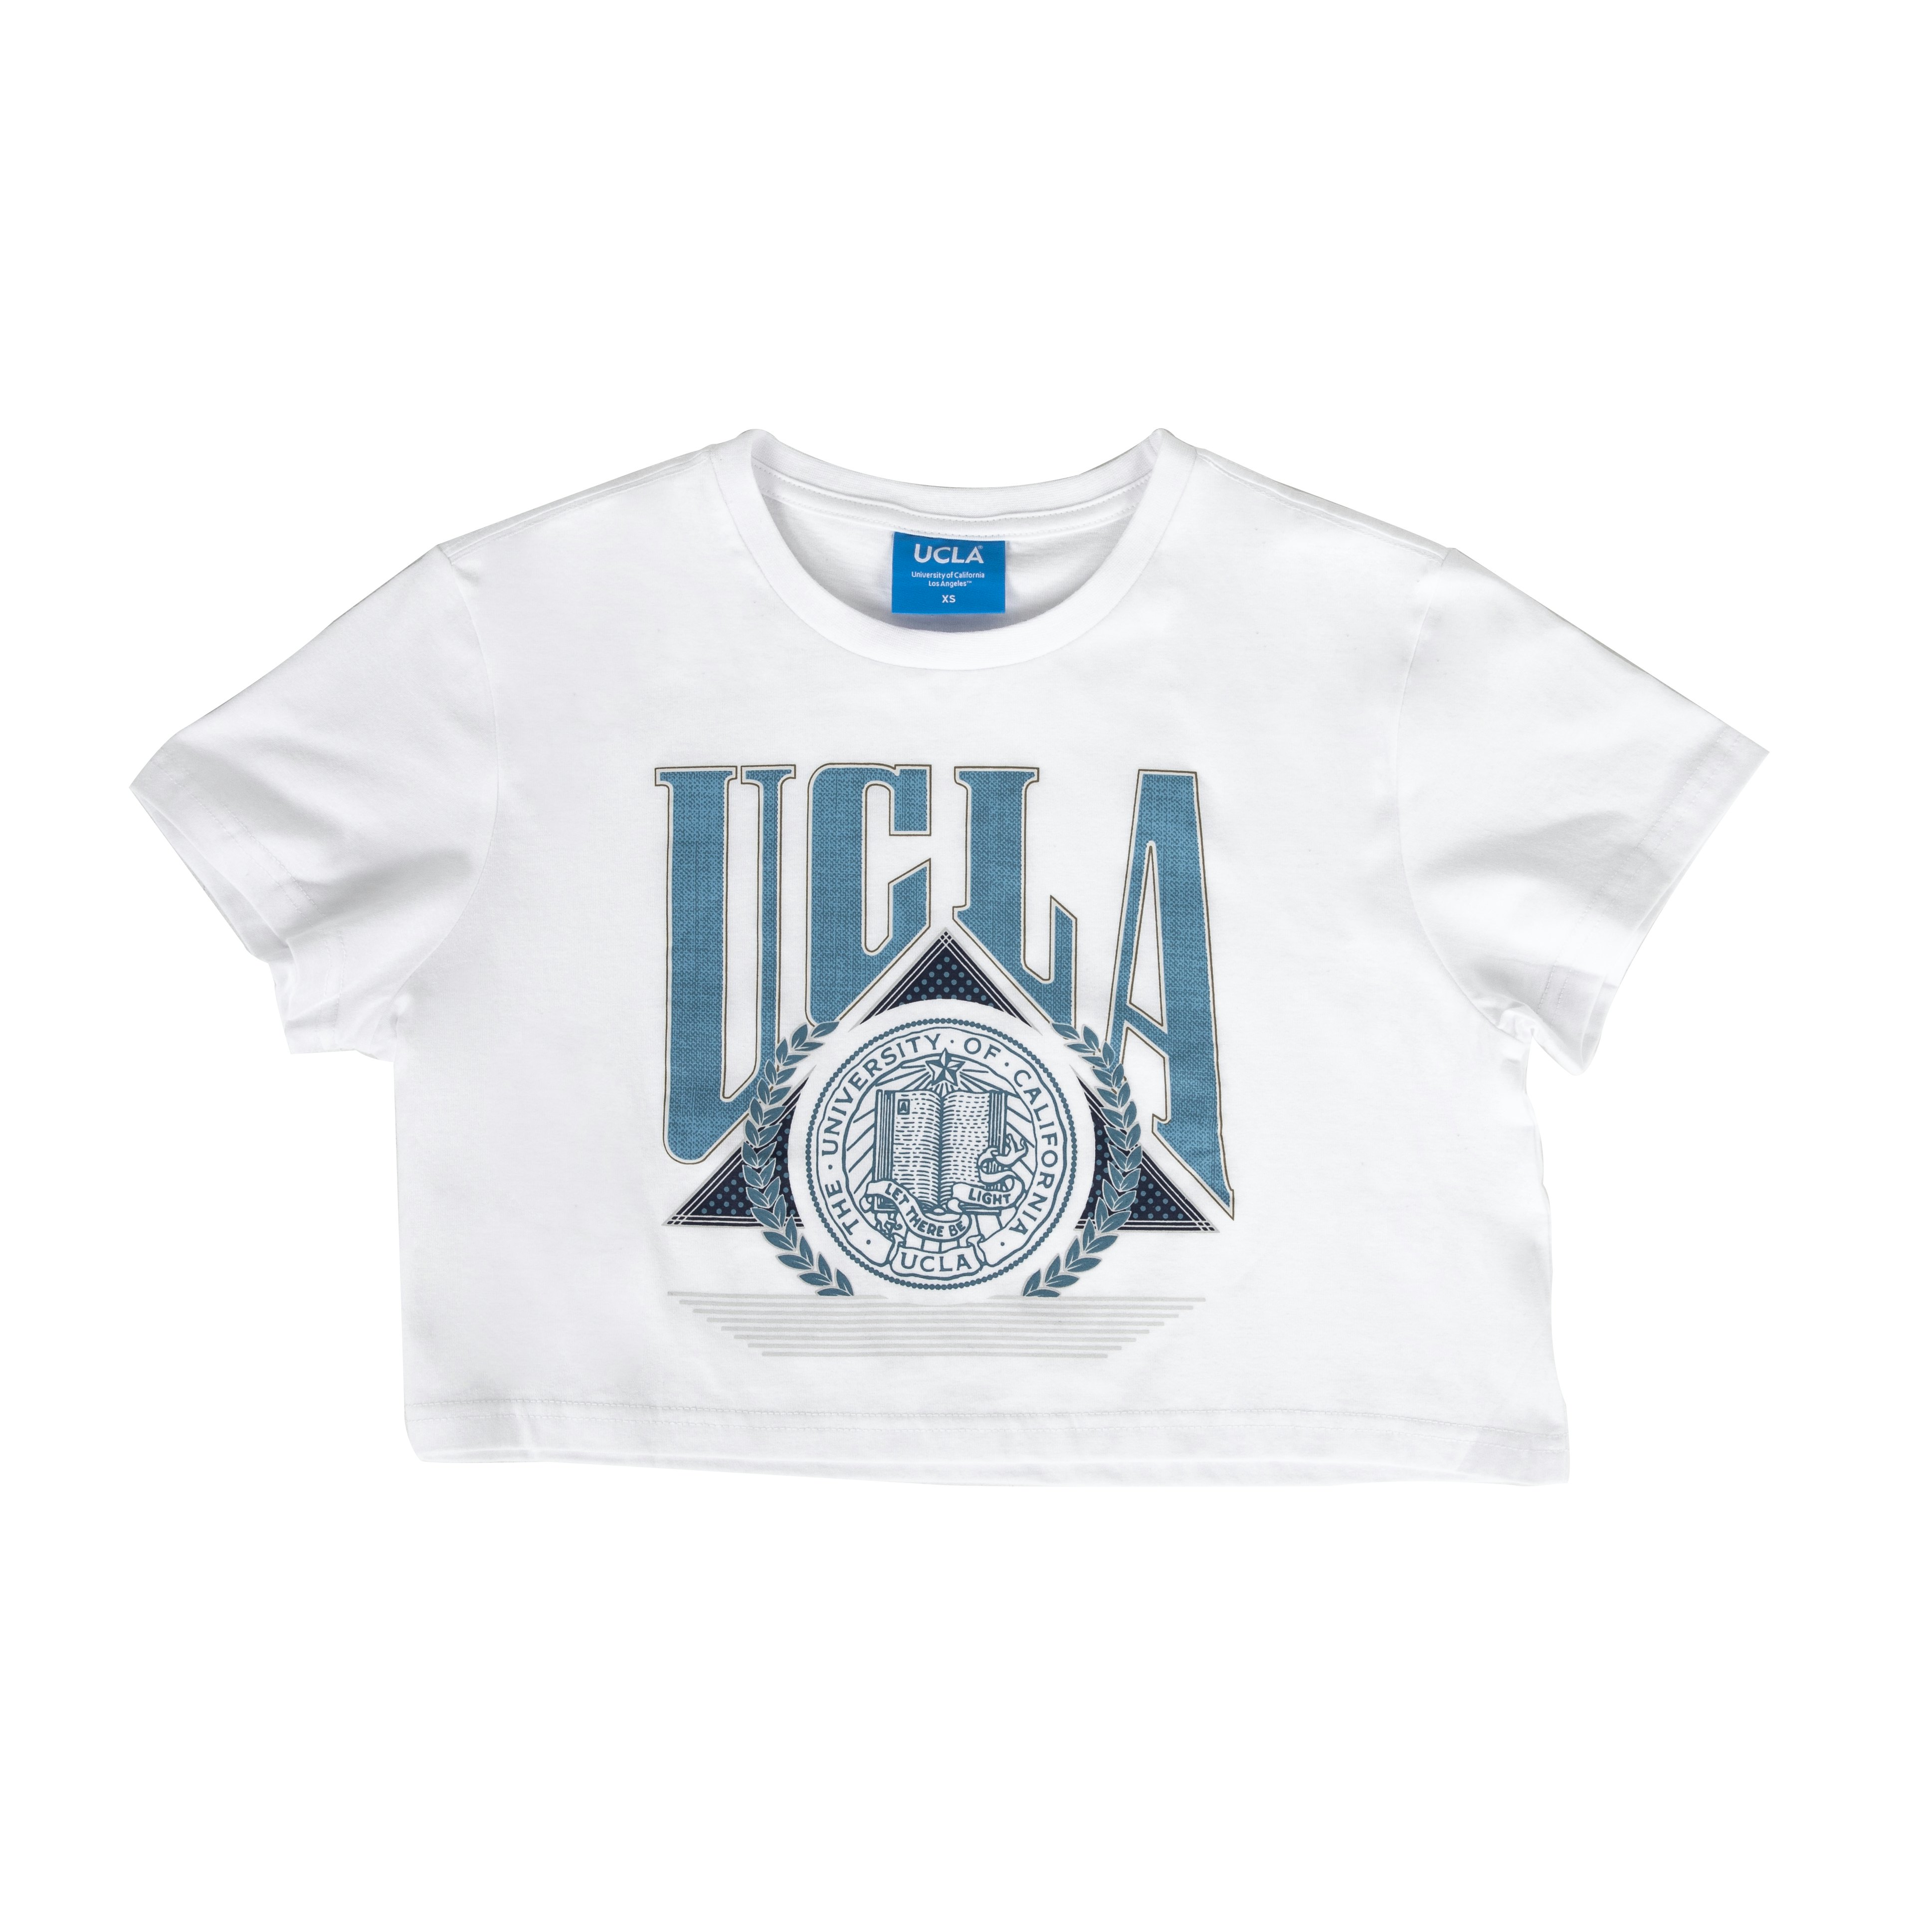 Princess Polly & UCLA Collaborated On '90s Collegiate Merch